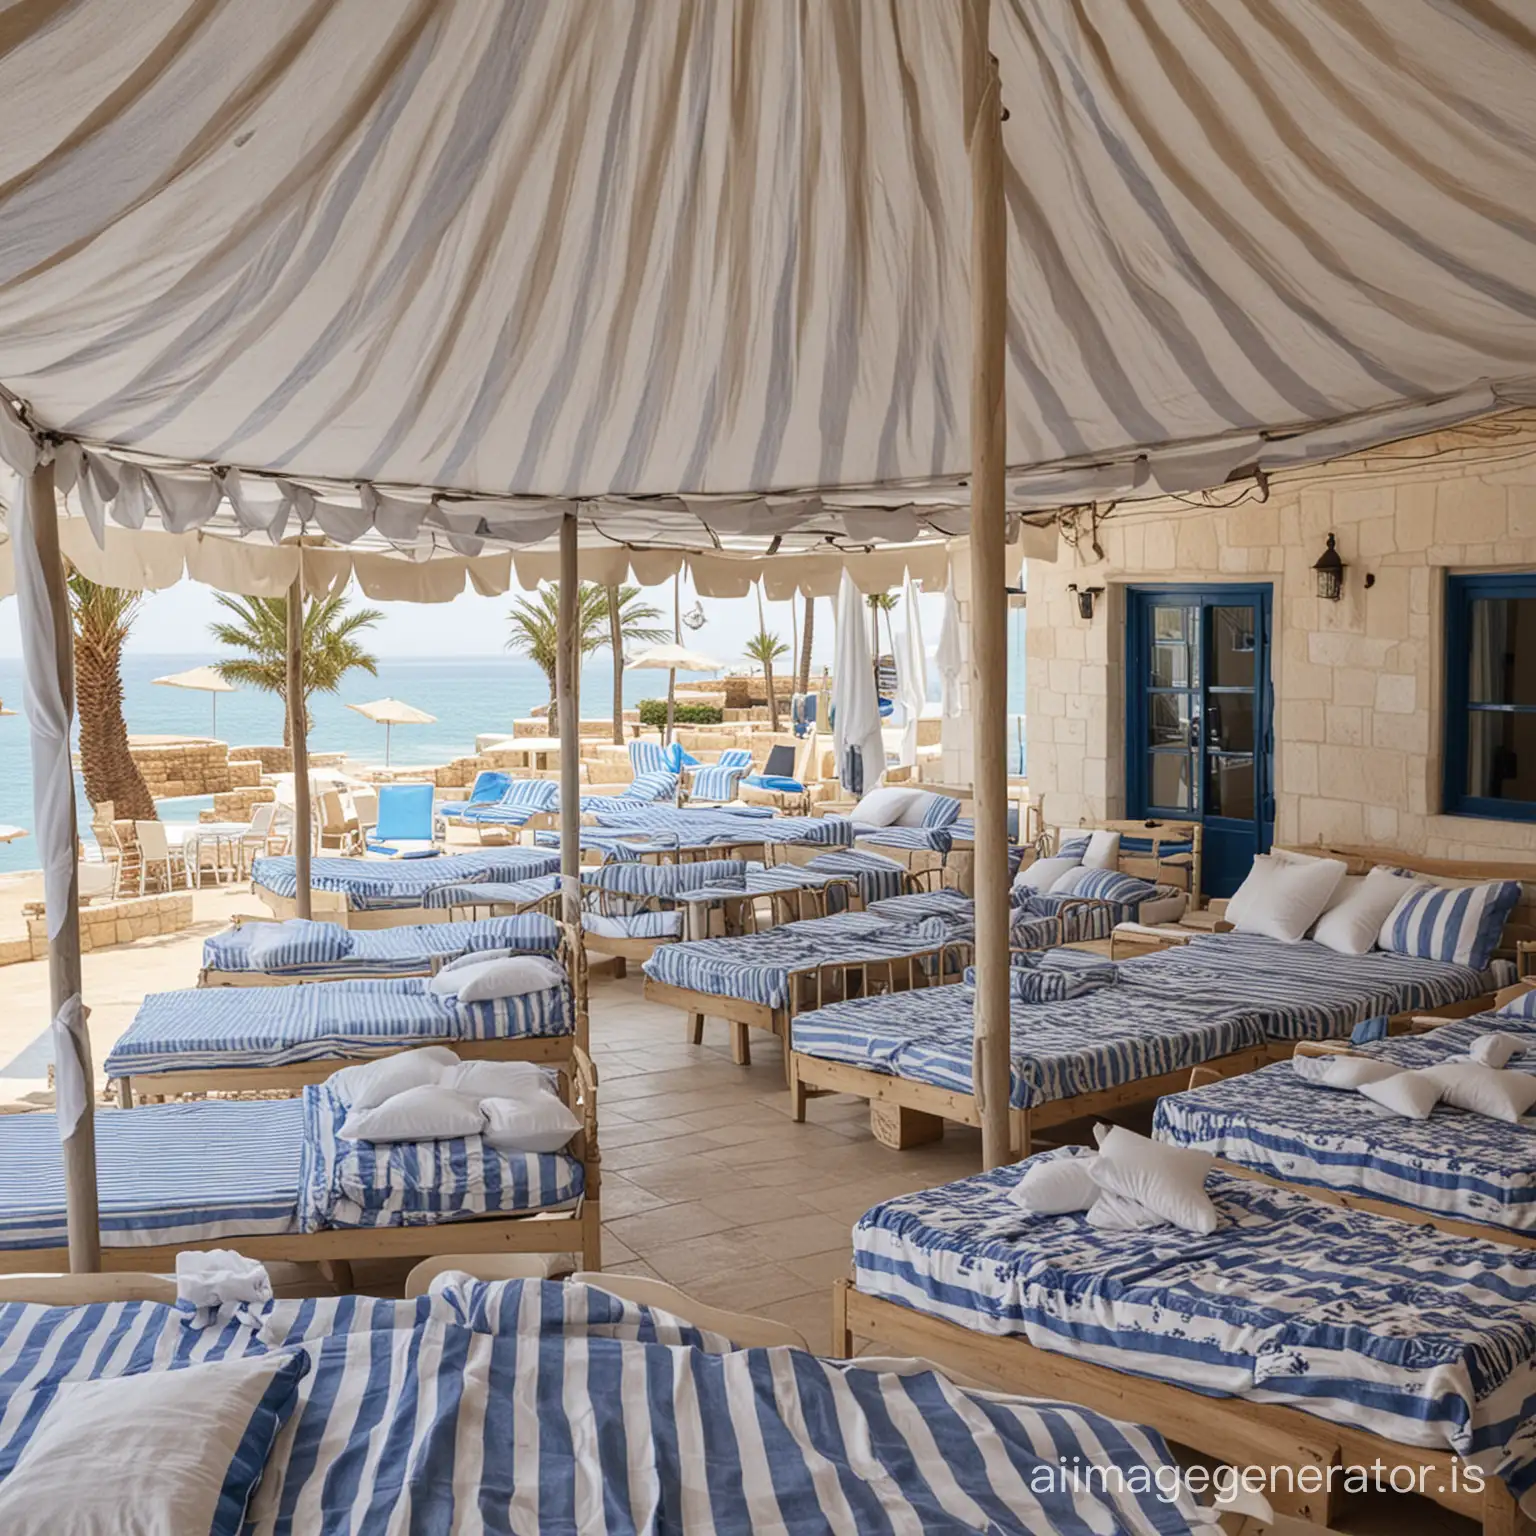 Tranquil-Batroun-Village-Club-Scene-with-Blue-and-White-Striped-Beds-and-Parasols